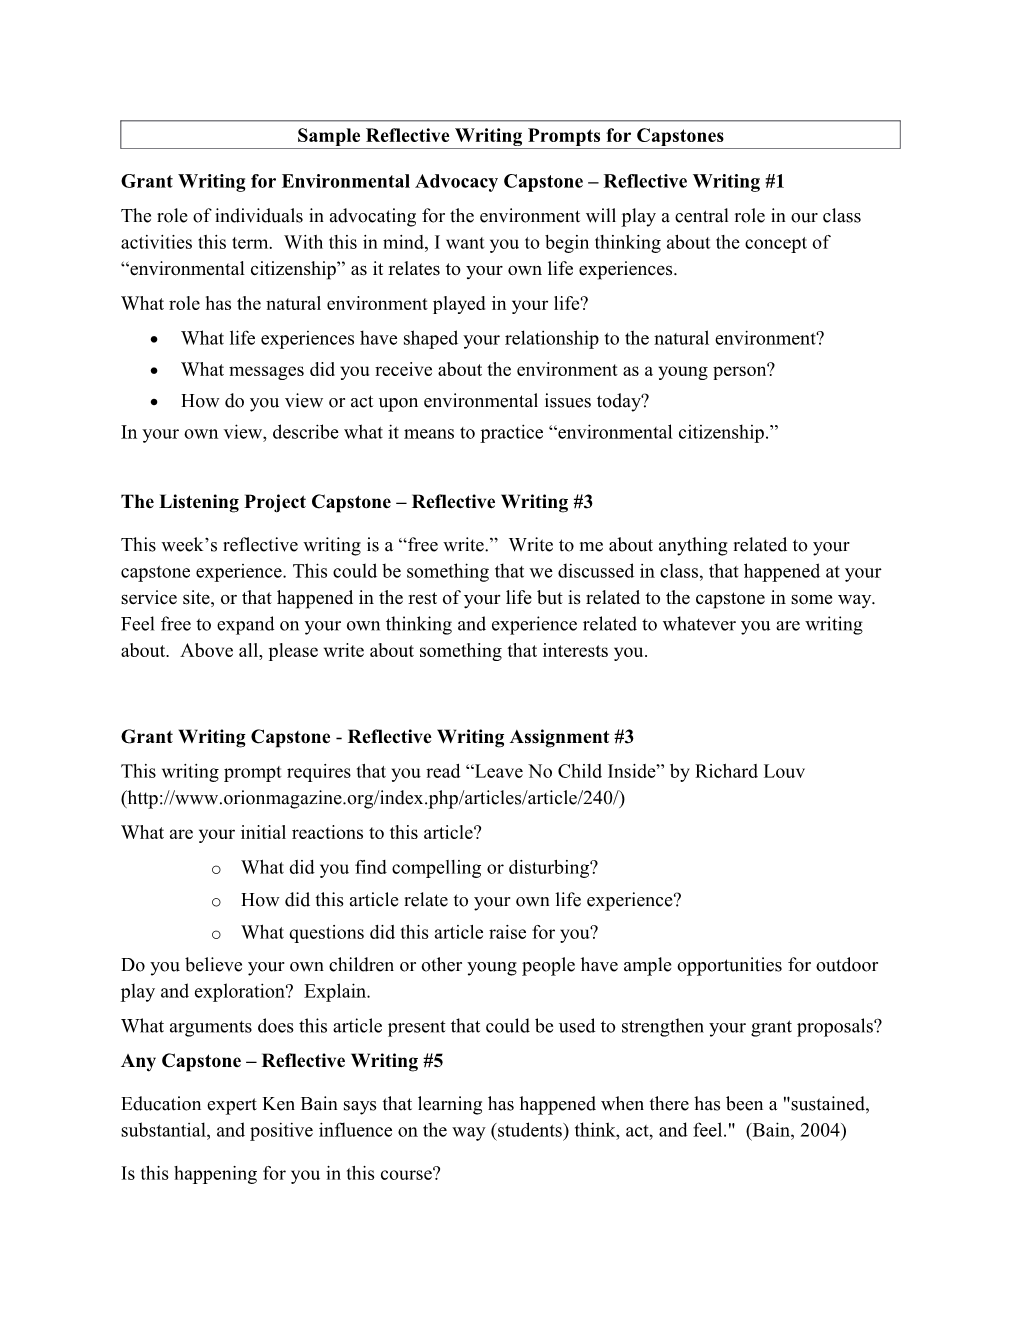 Sample Reflective Writing Prompts for Capstones